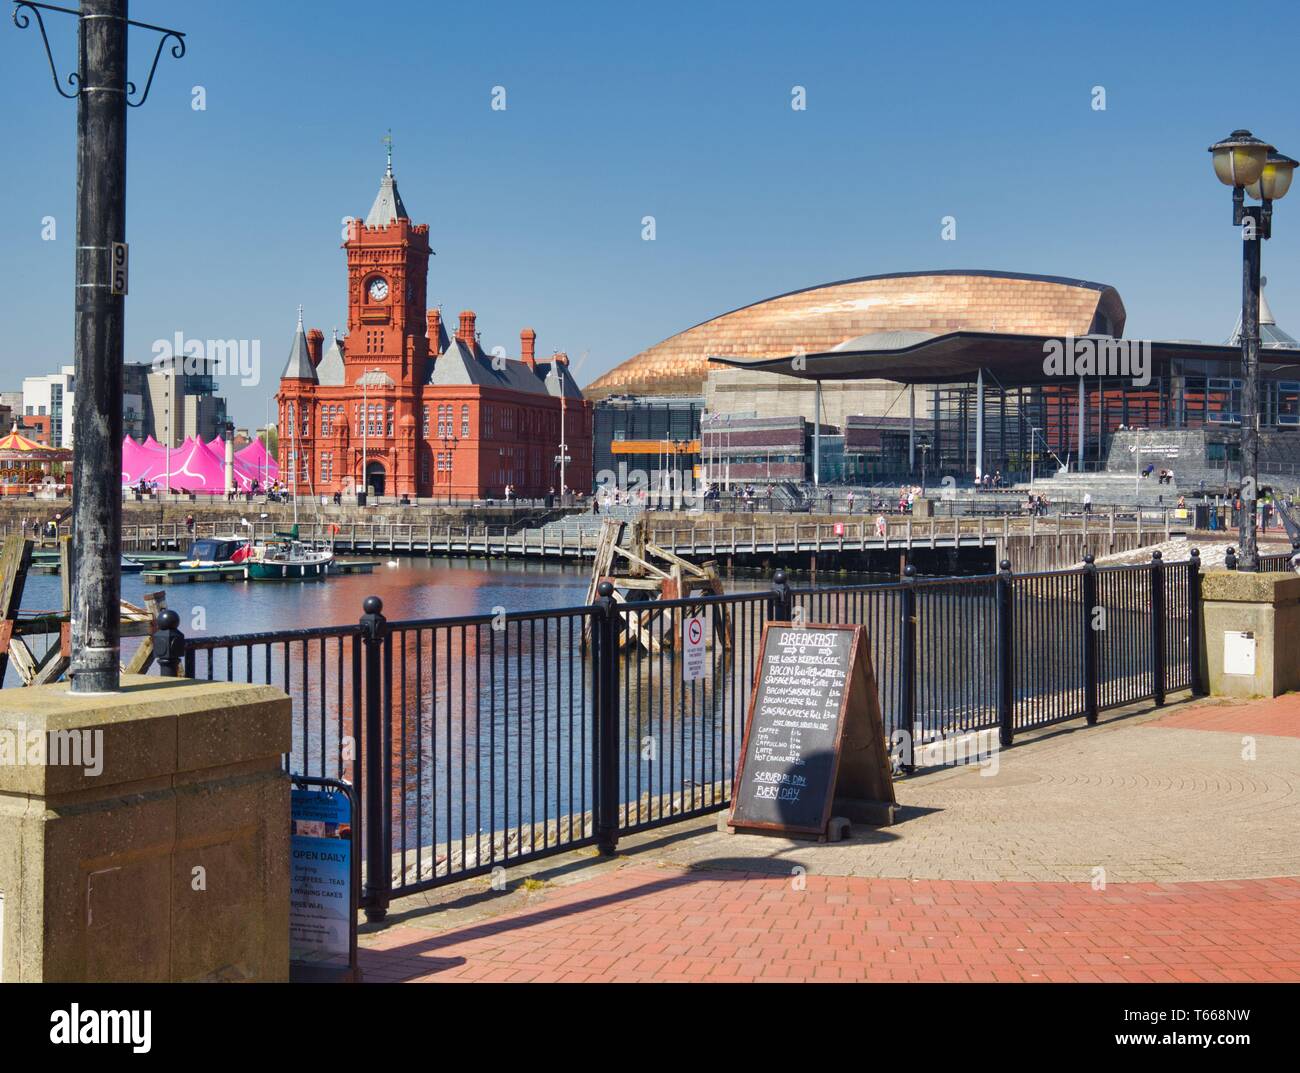 Cardiff Bay with landmarks. National Assembly for Wales, Pierhead building and the Wales Millennium Centre, Cardiff, Wales, United Kingdom Stock Photo